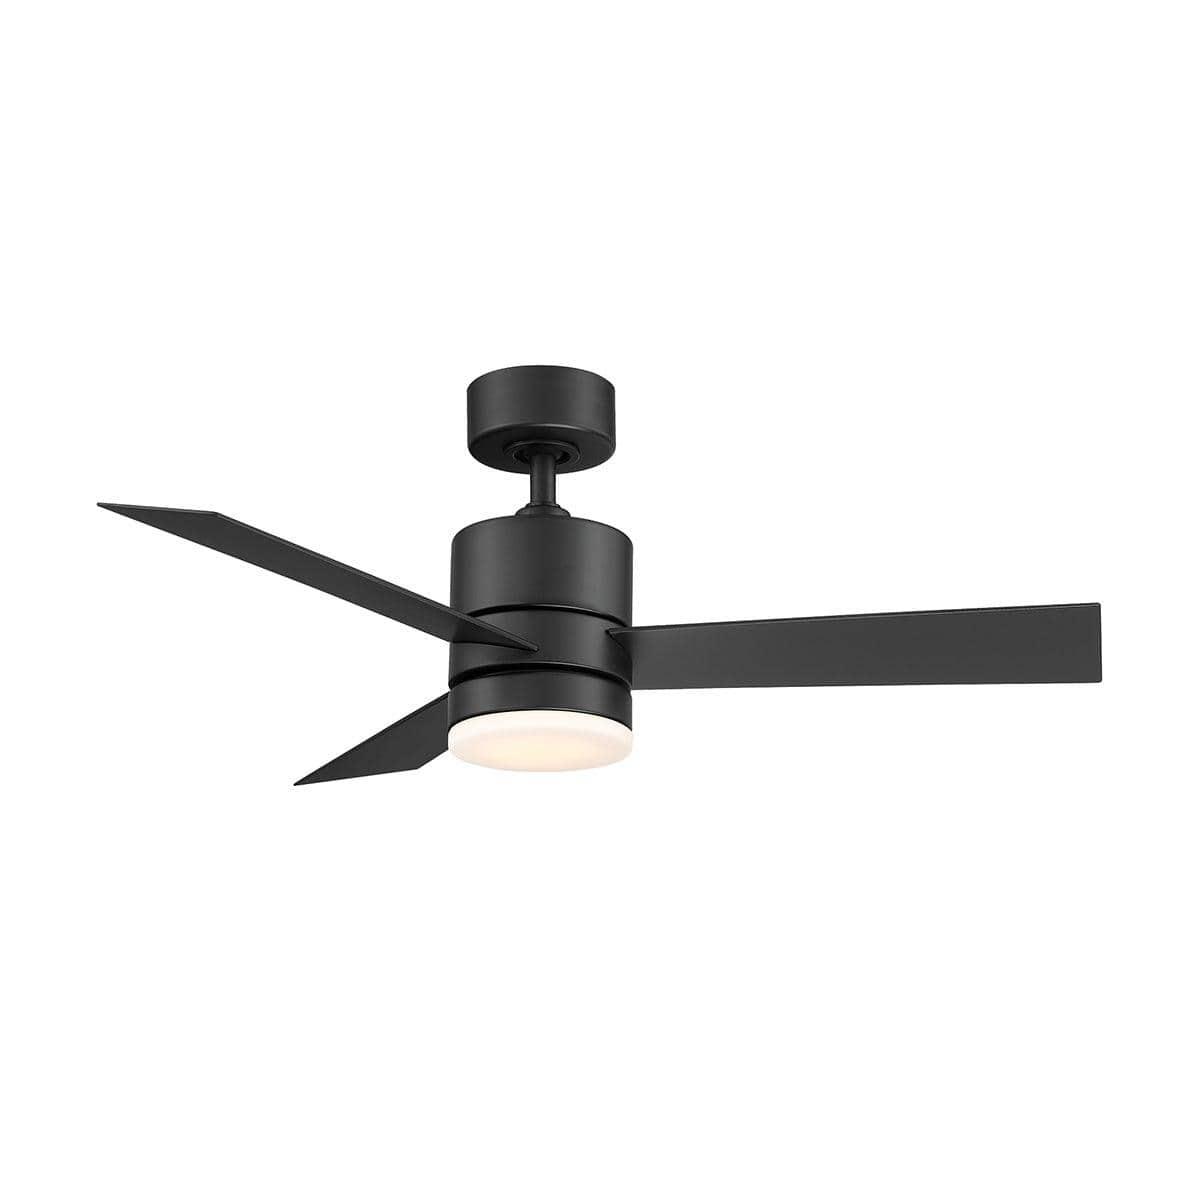 Modern Forms - Axis Ceiling Fan - FR-W1803-44L-MB | Montreal Lighting & Hardware